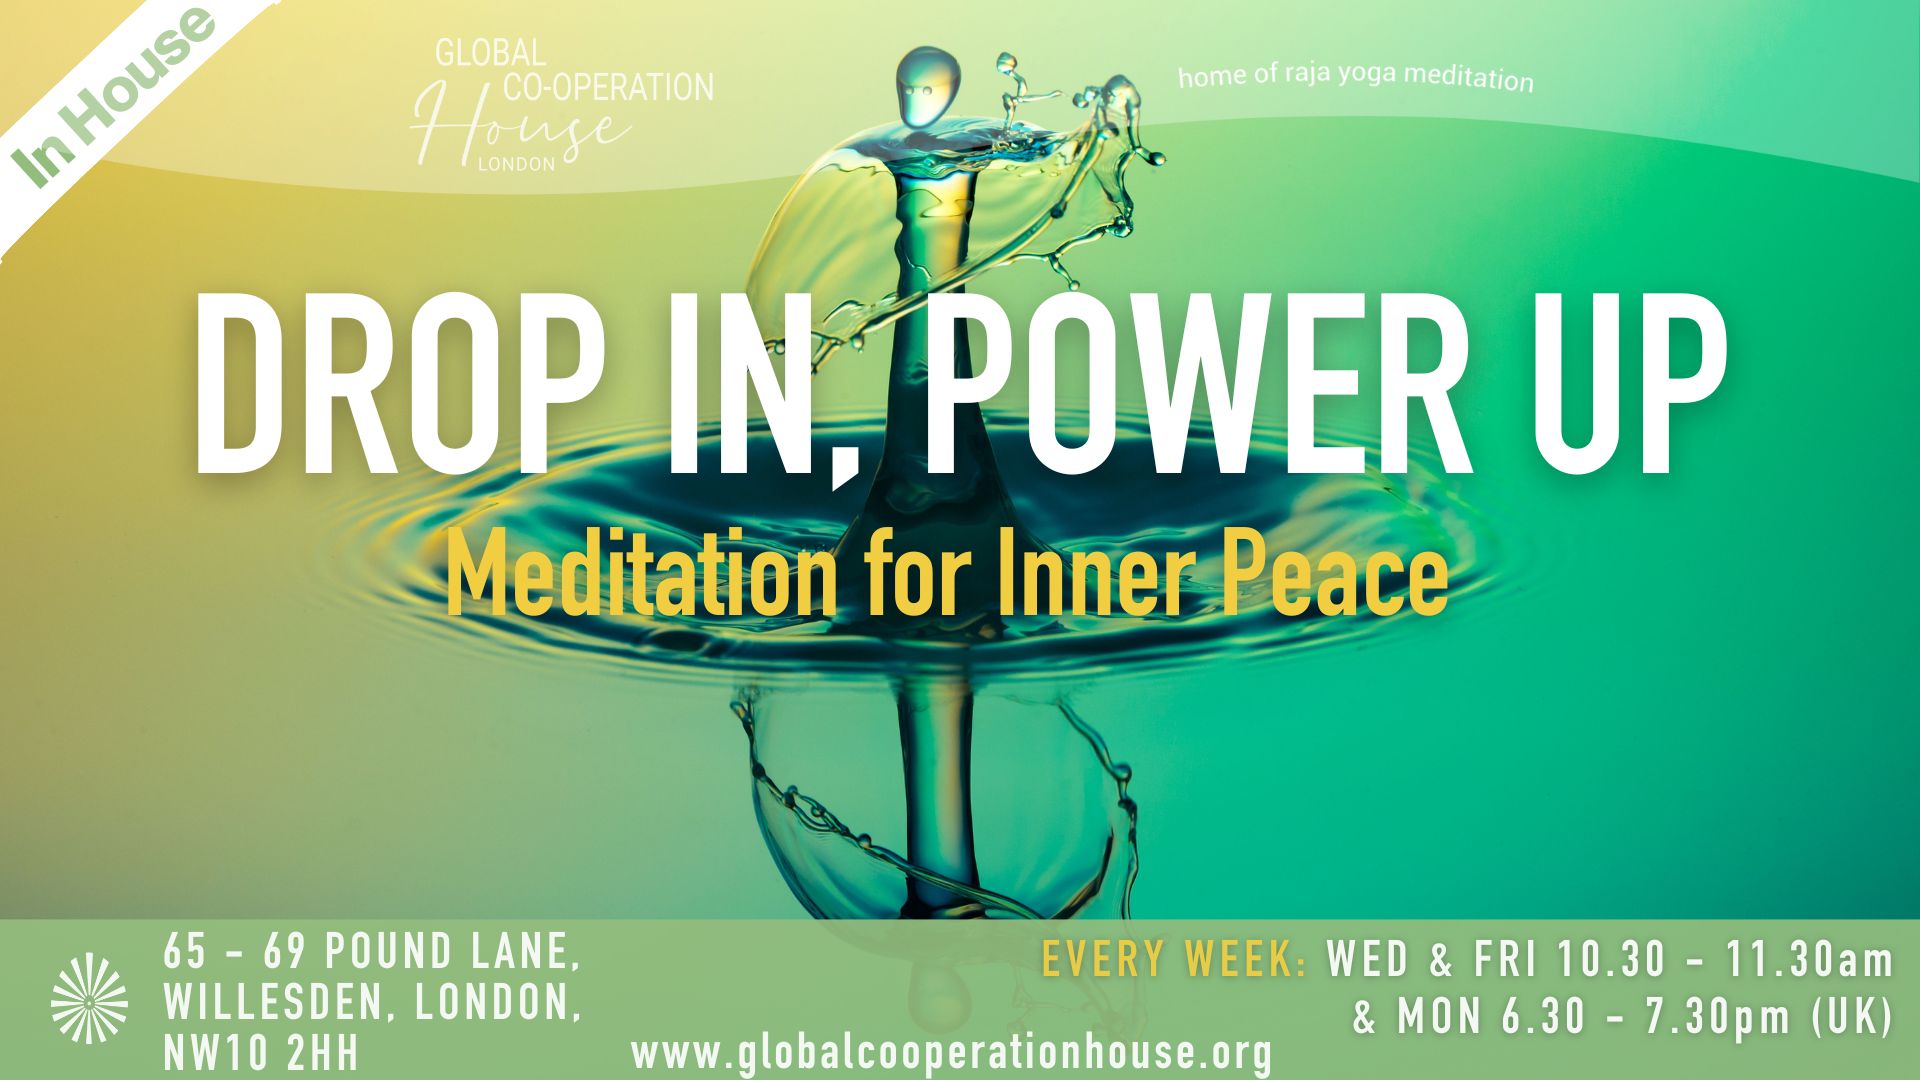 Drop IN, Power UP - Meditation for Inner Peace